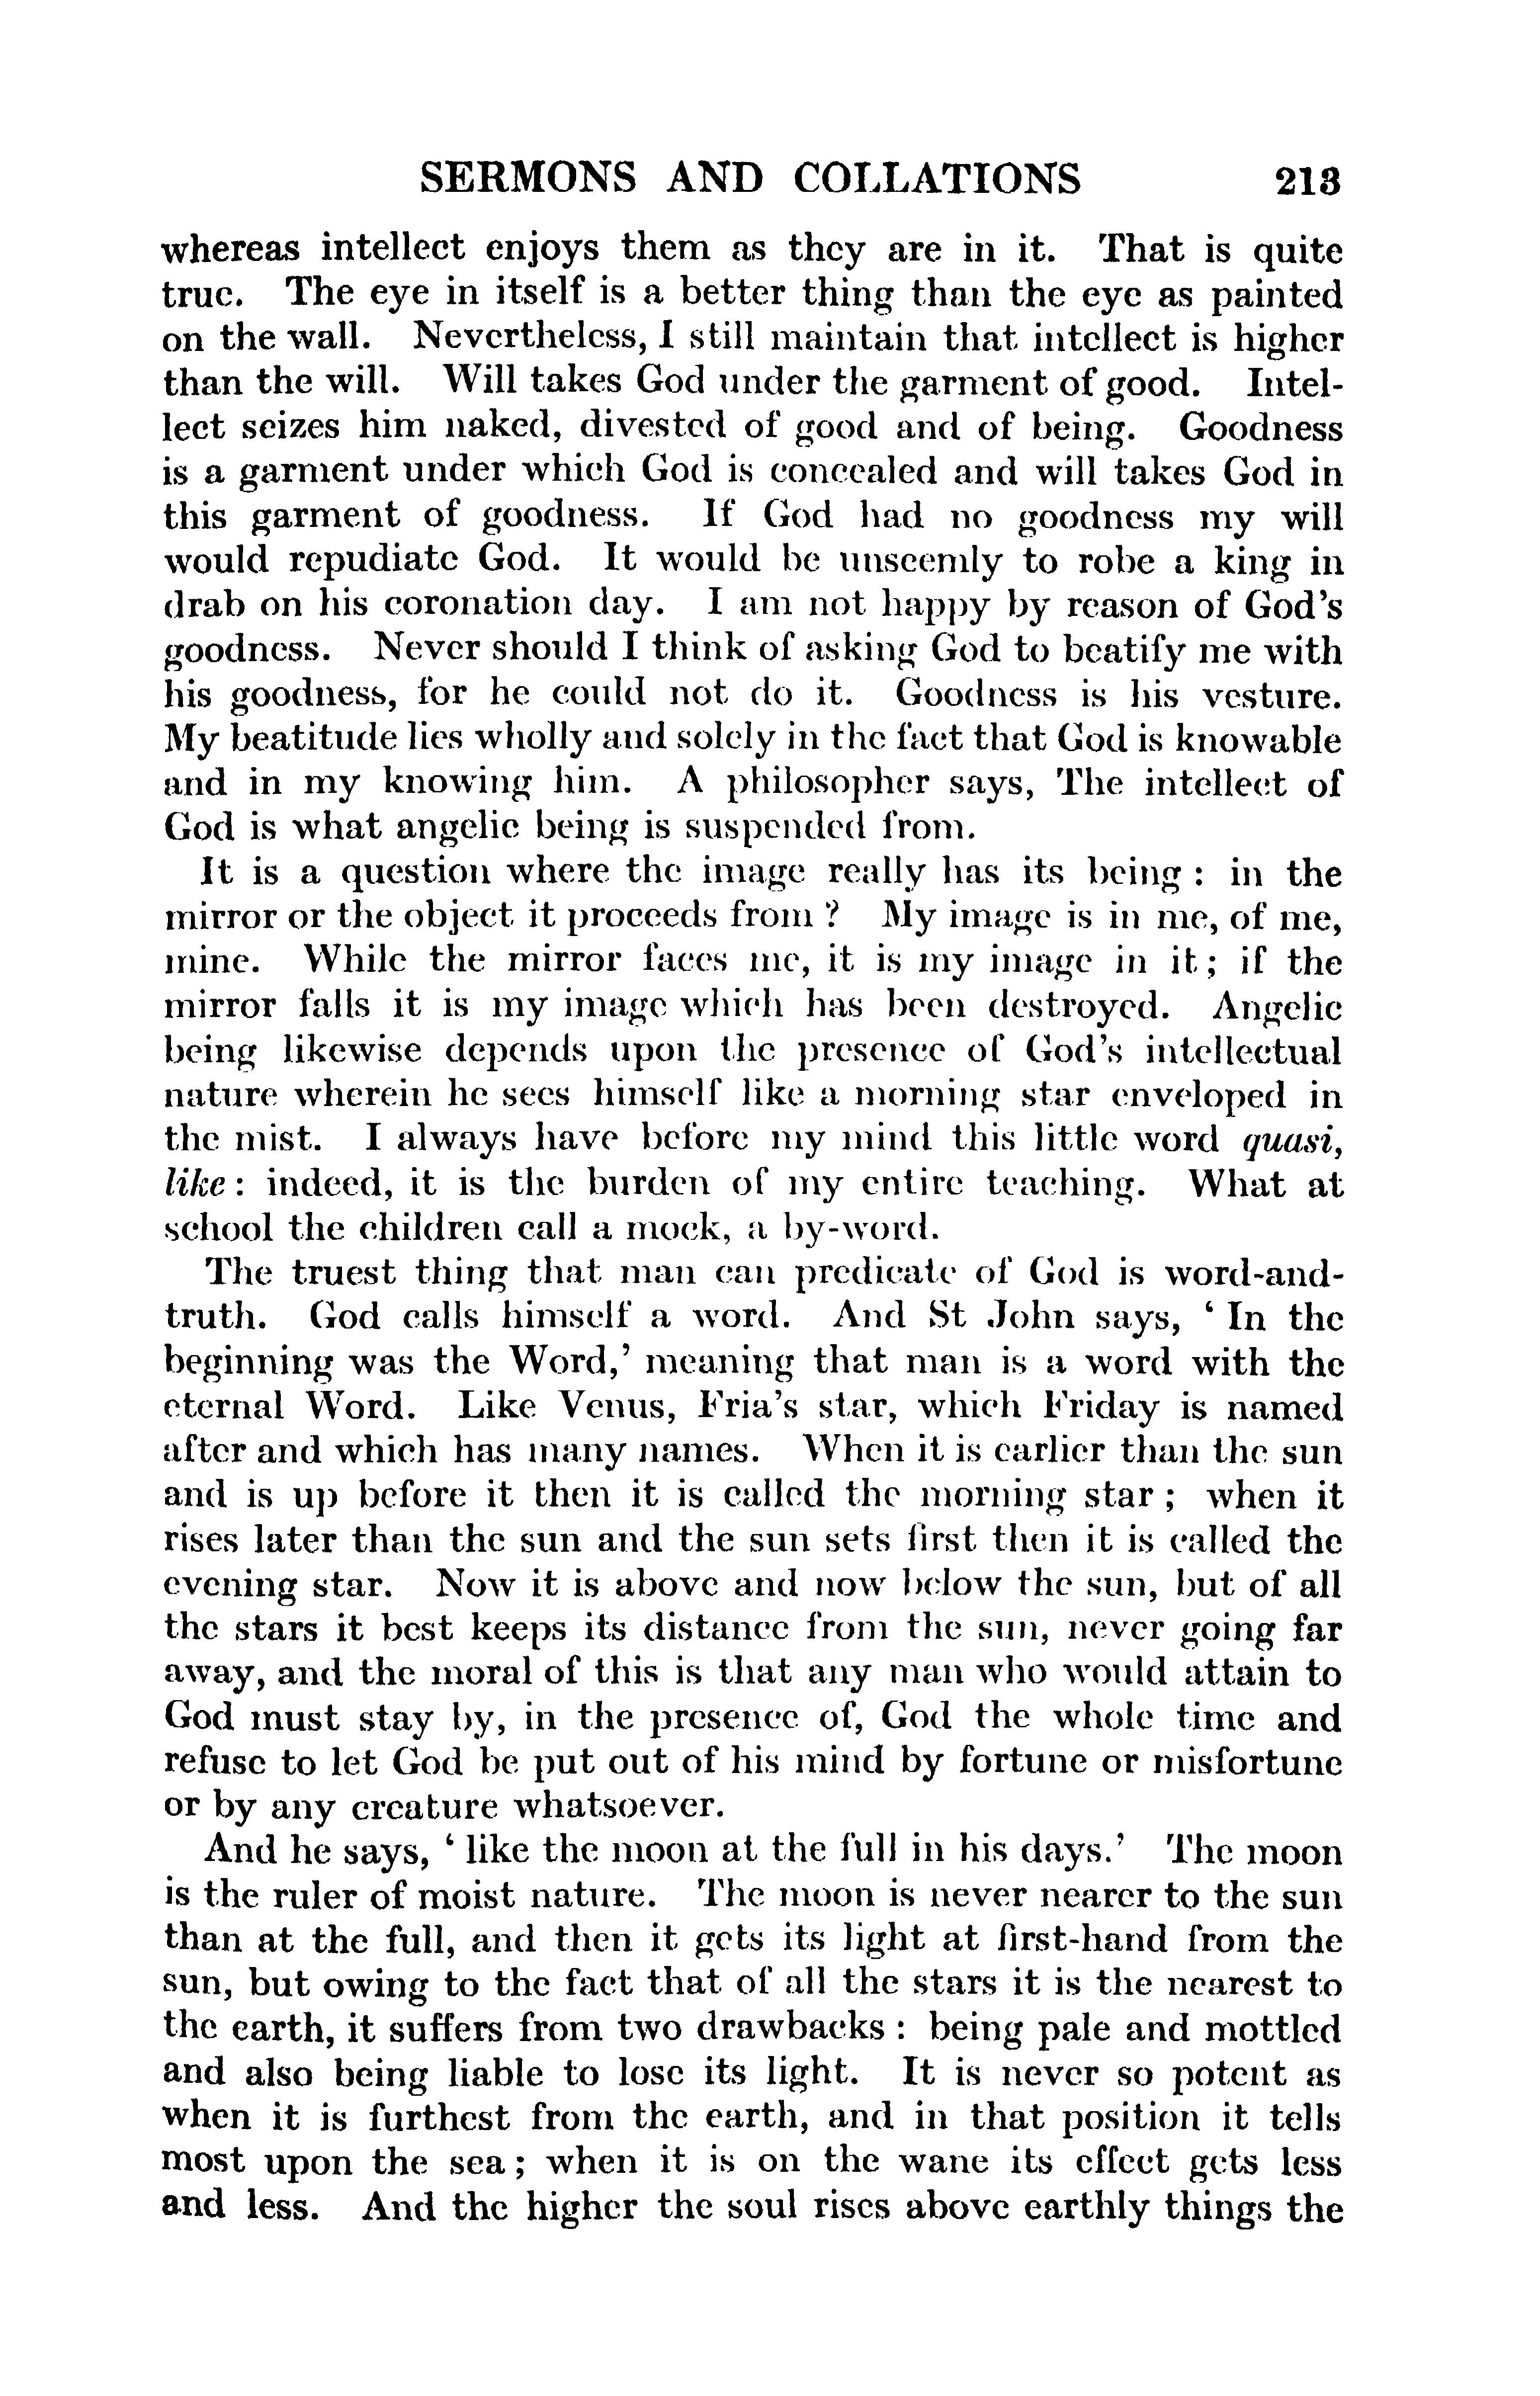 Image of page 0237